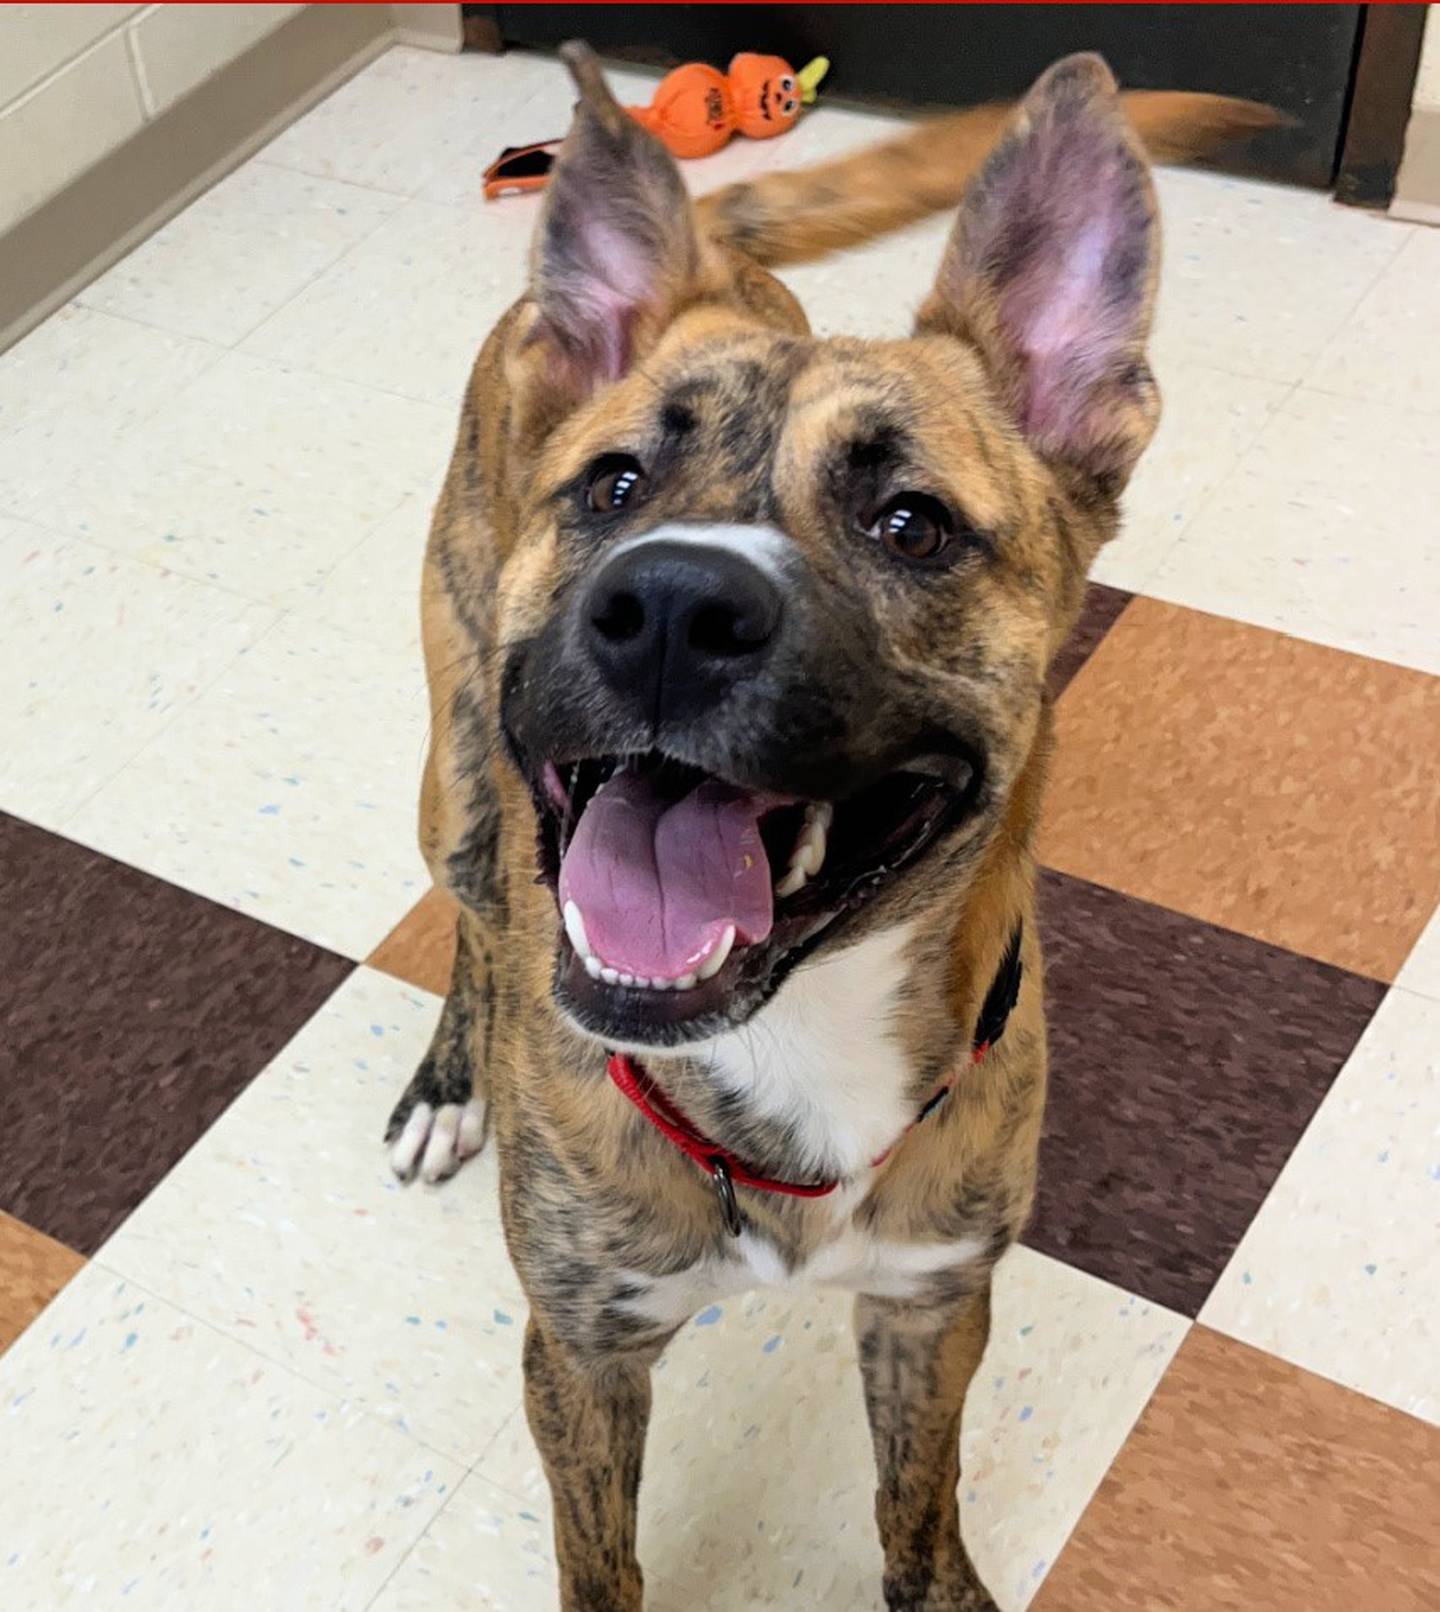 Thor is an 8-month-old shepherd mix that was recently surrendered to Joliet Township Animal Control. He’s super wiggly and has a great personality. He previously lived with children and cats and is also dog friendly. To meet Thor, call Joliet Township Animal Control at 815-725-0333.